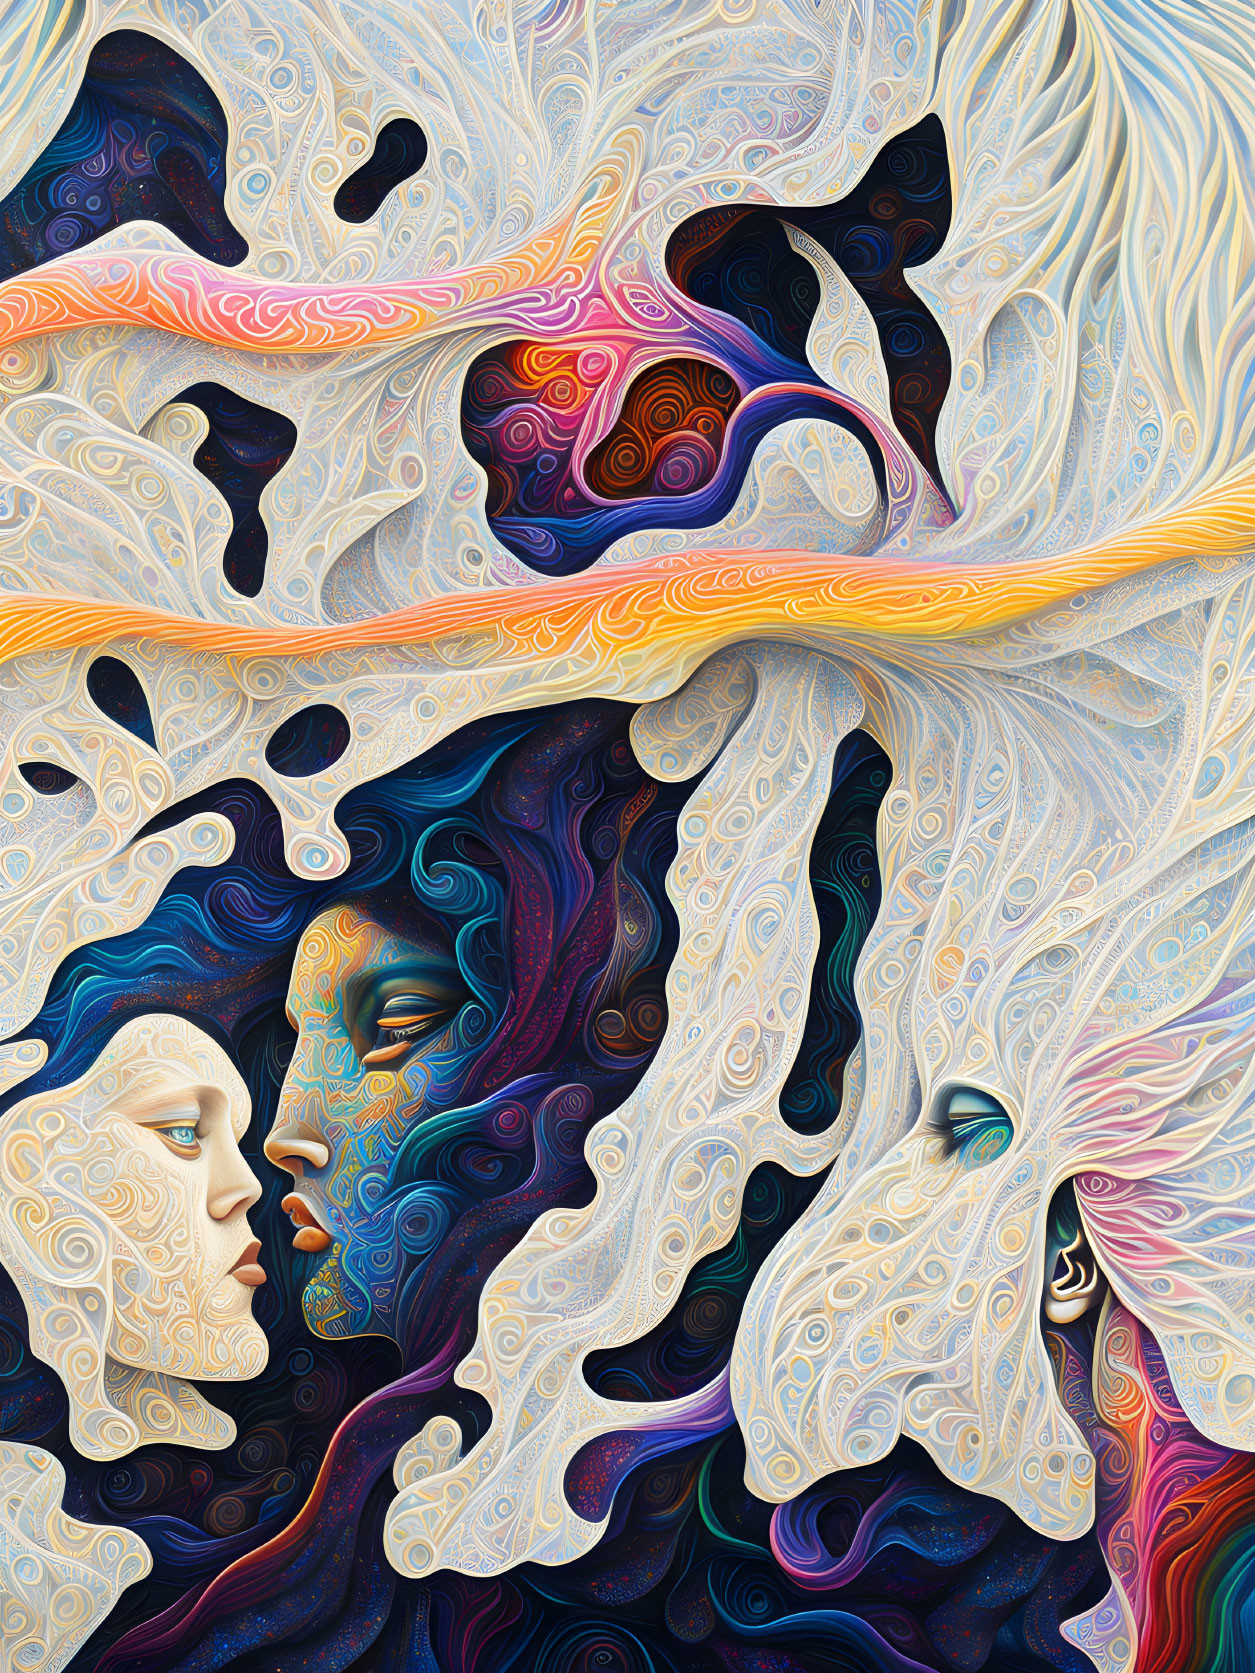 Colorful Abstract Artwork with Swirling Patterns and Faces Profiles